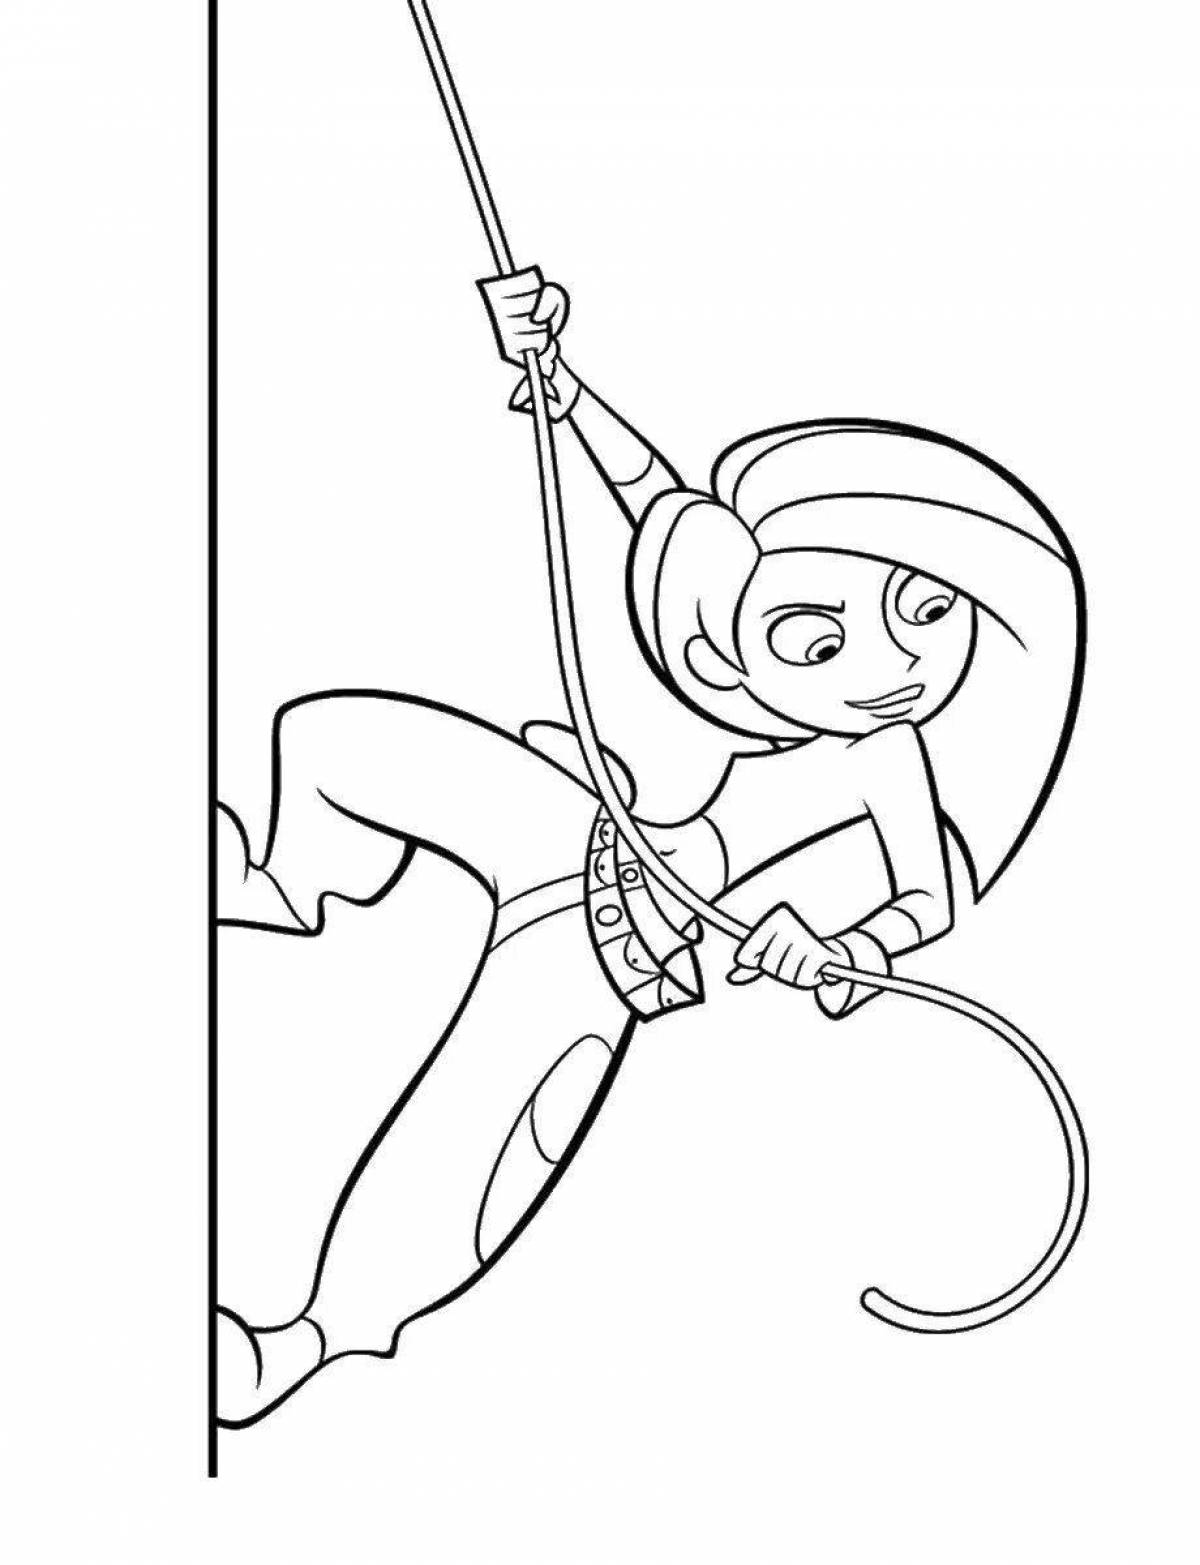 Magical Spy Kids Coloring Page